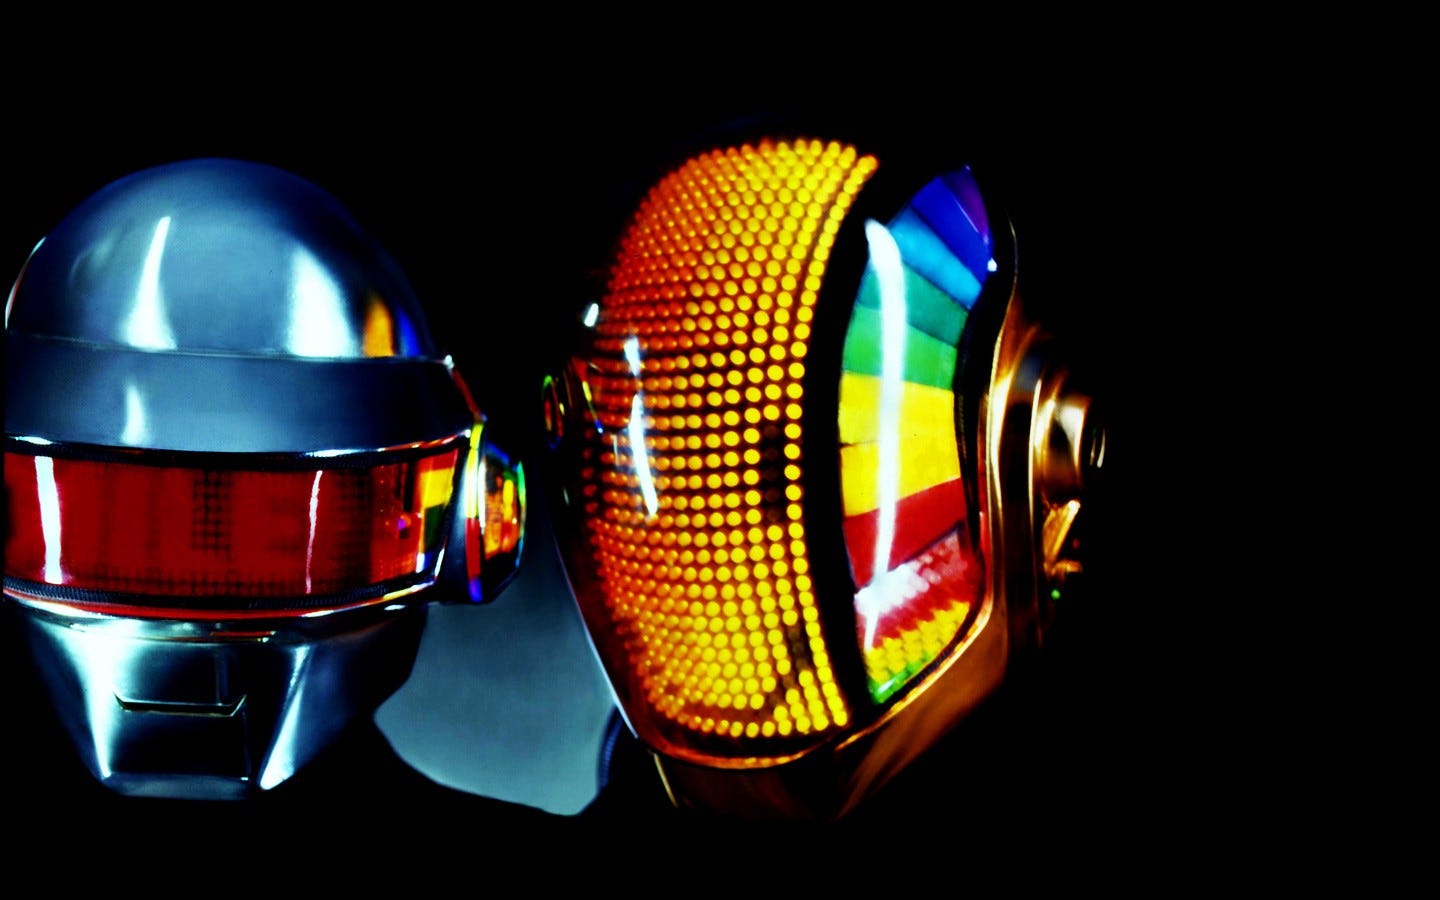 A History Of Roule Daft Punk S Forgotten Record Label By Ben Cardew Cuepoint Medium